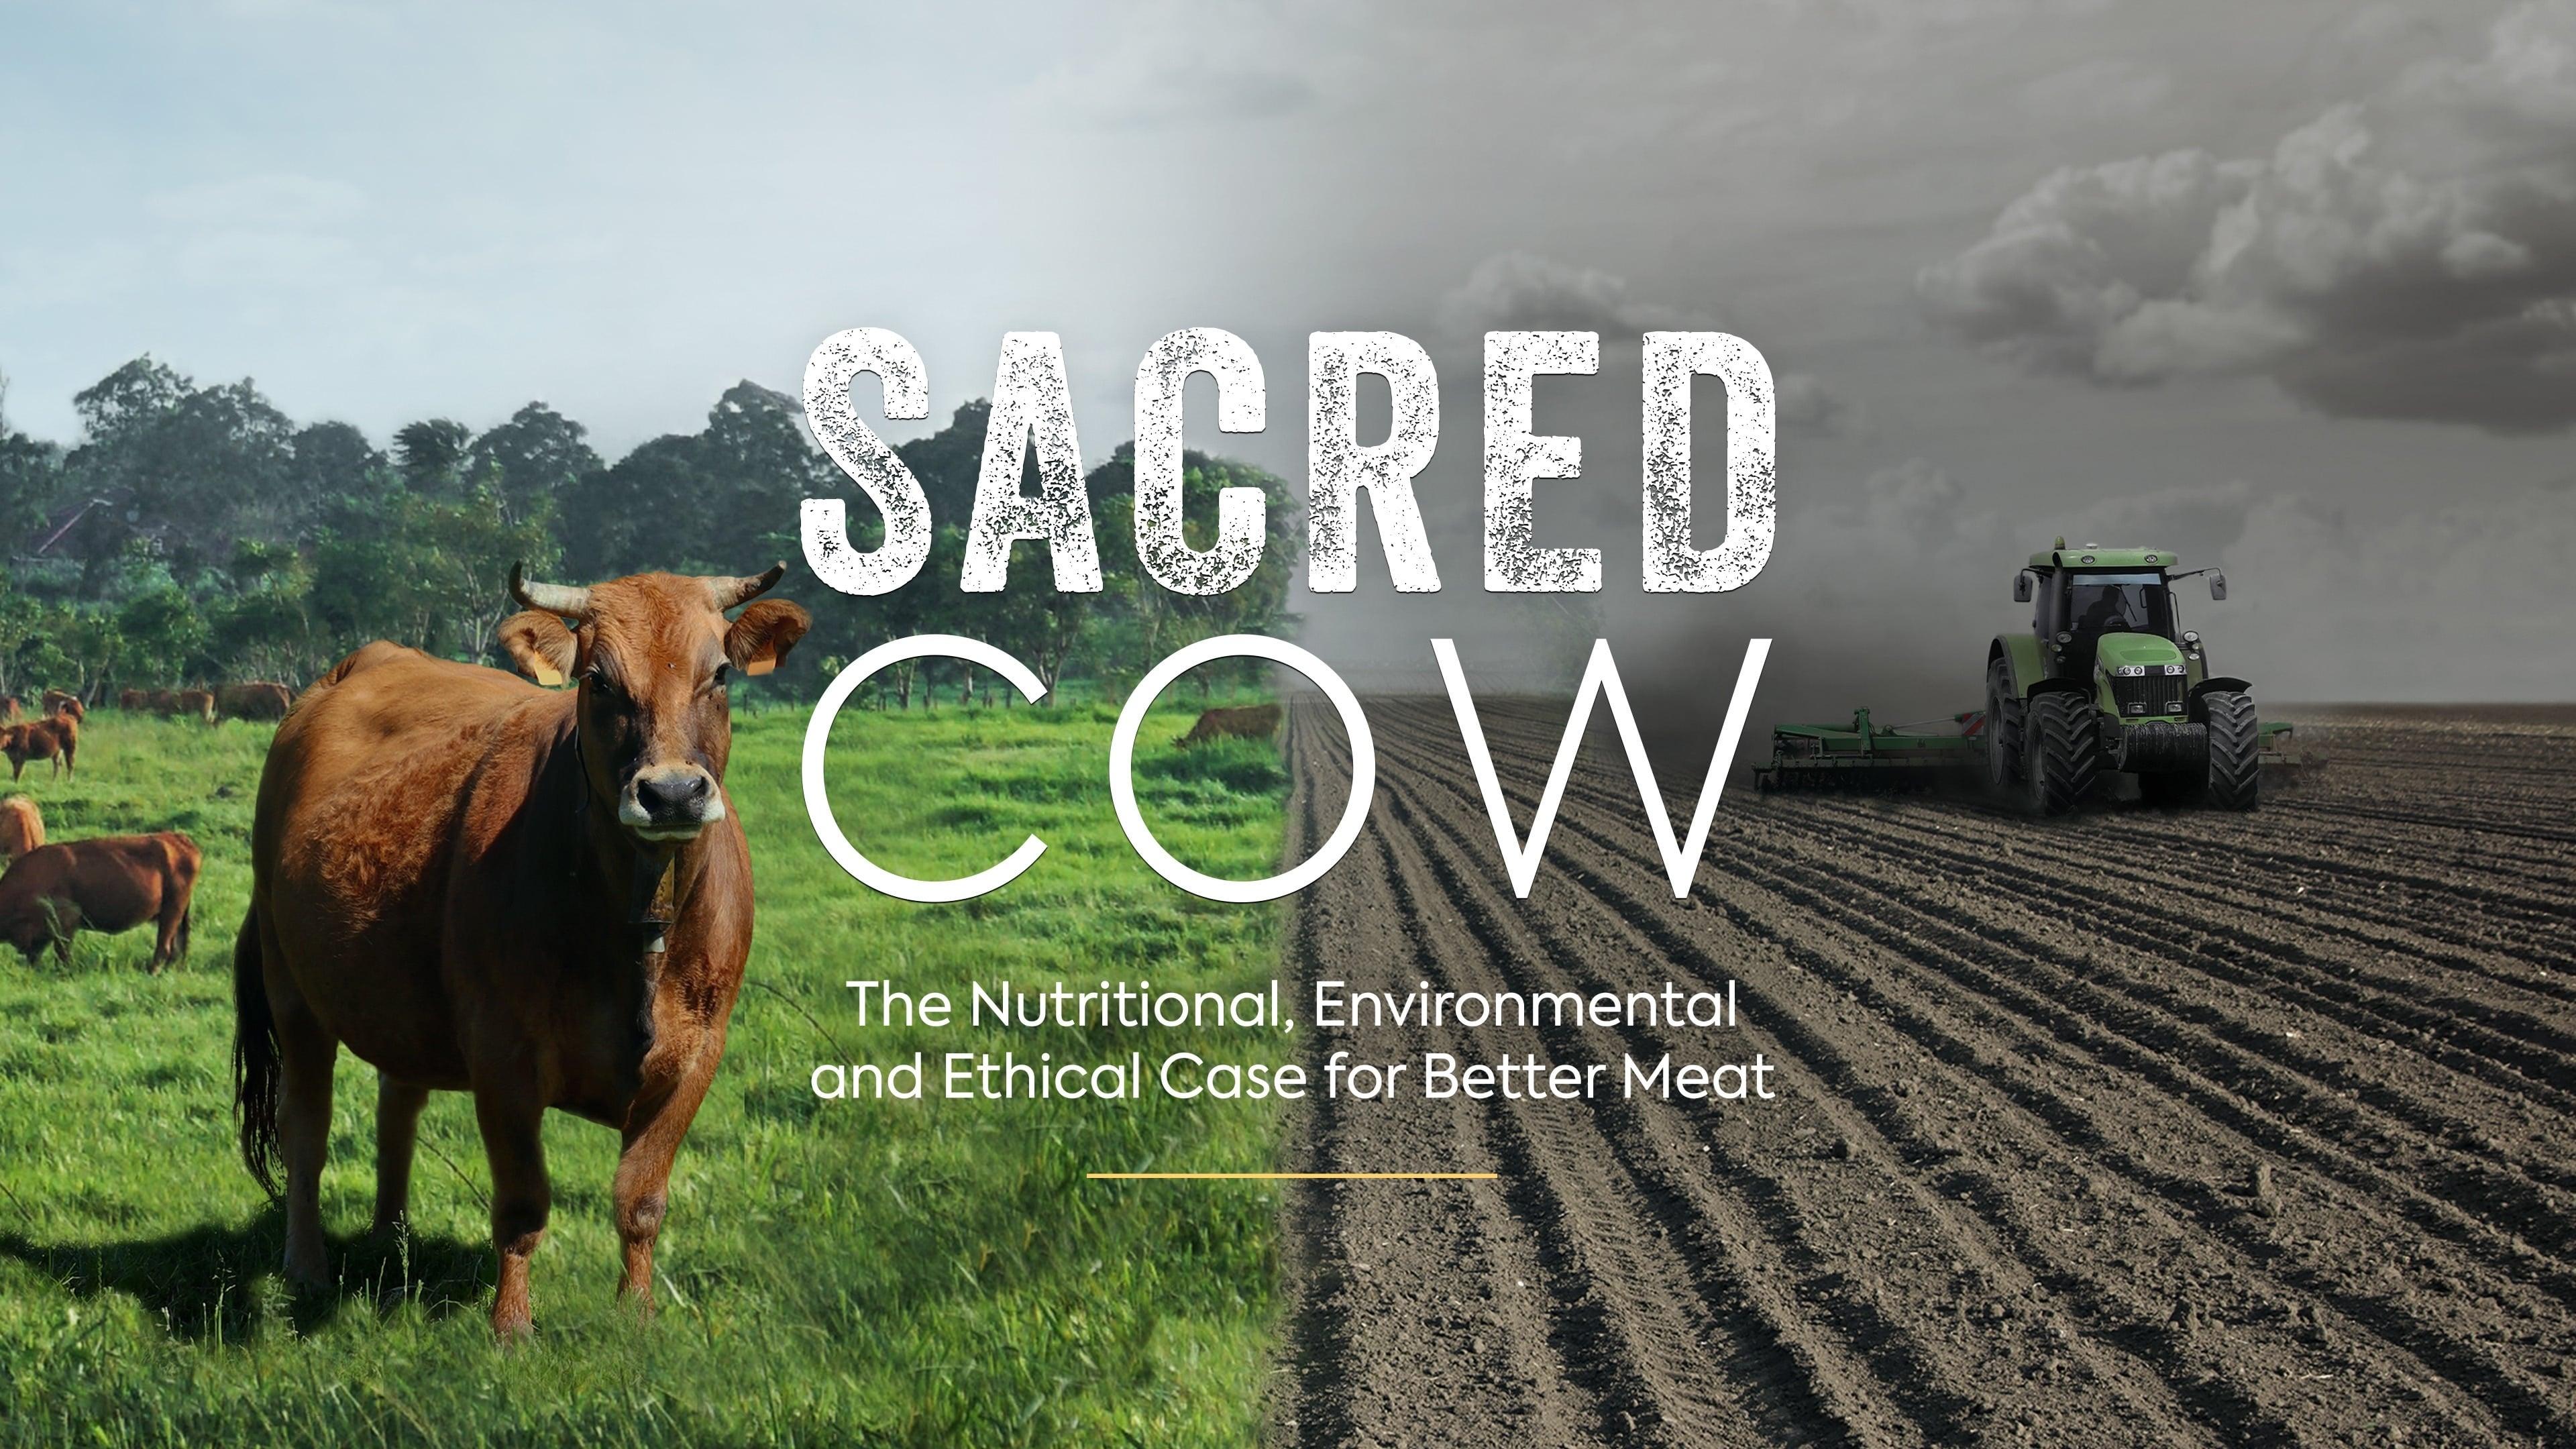 Sacred Cow: The Nutritional, Environmental and Ethical Case for Better Meat backdrop